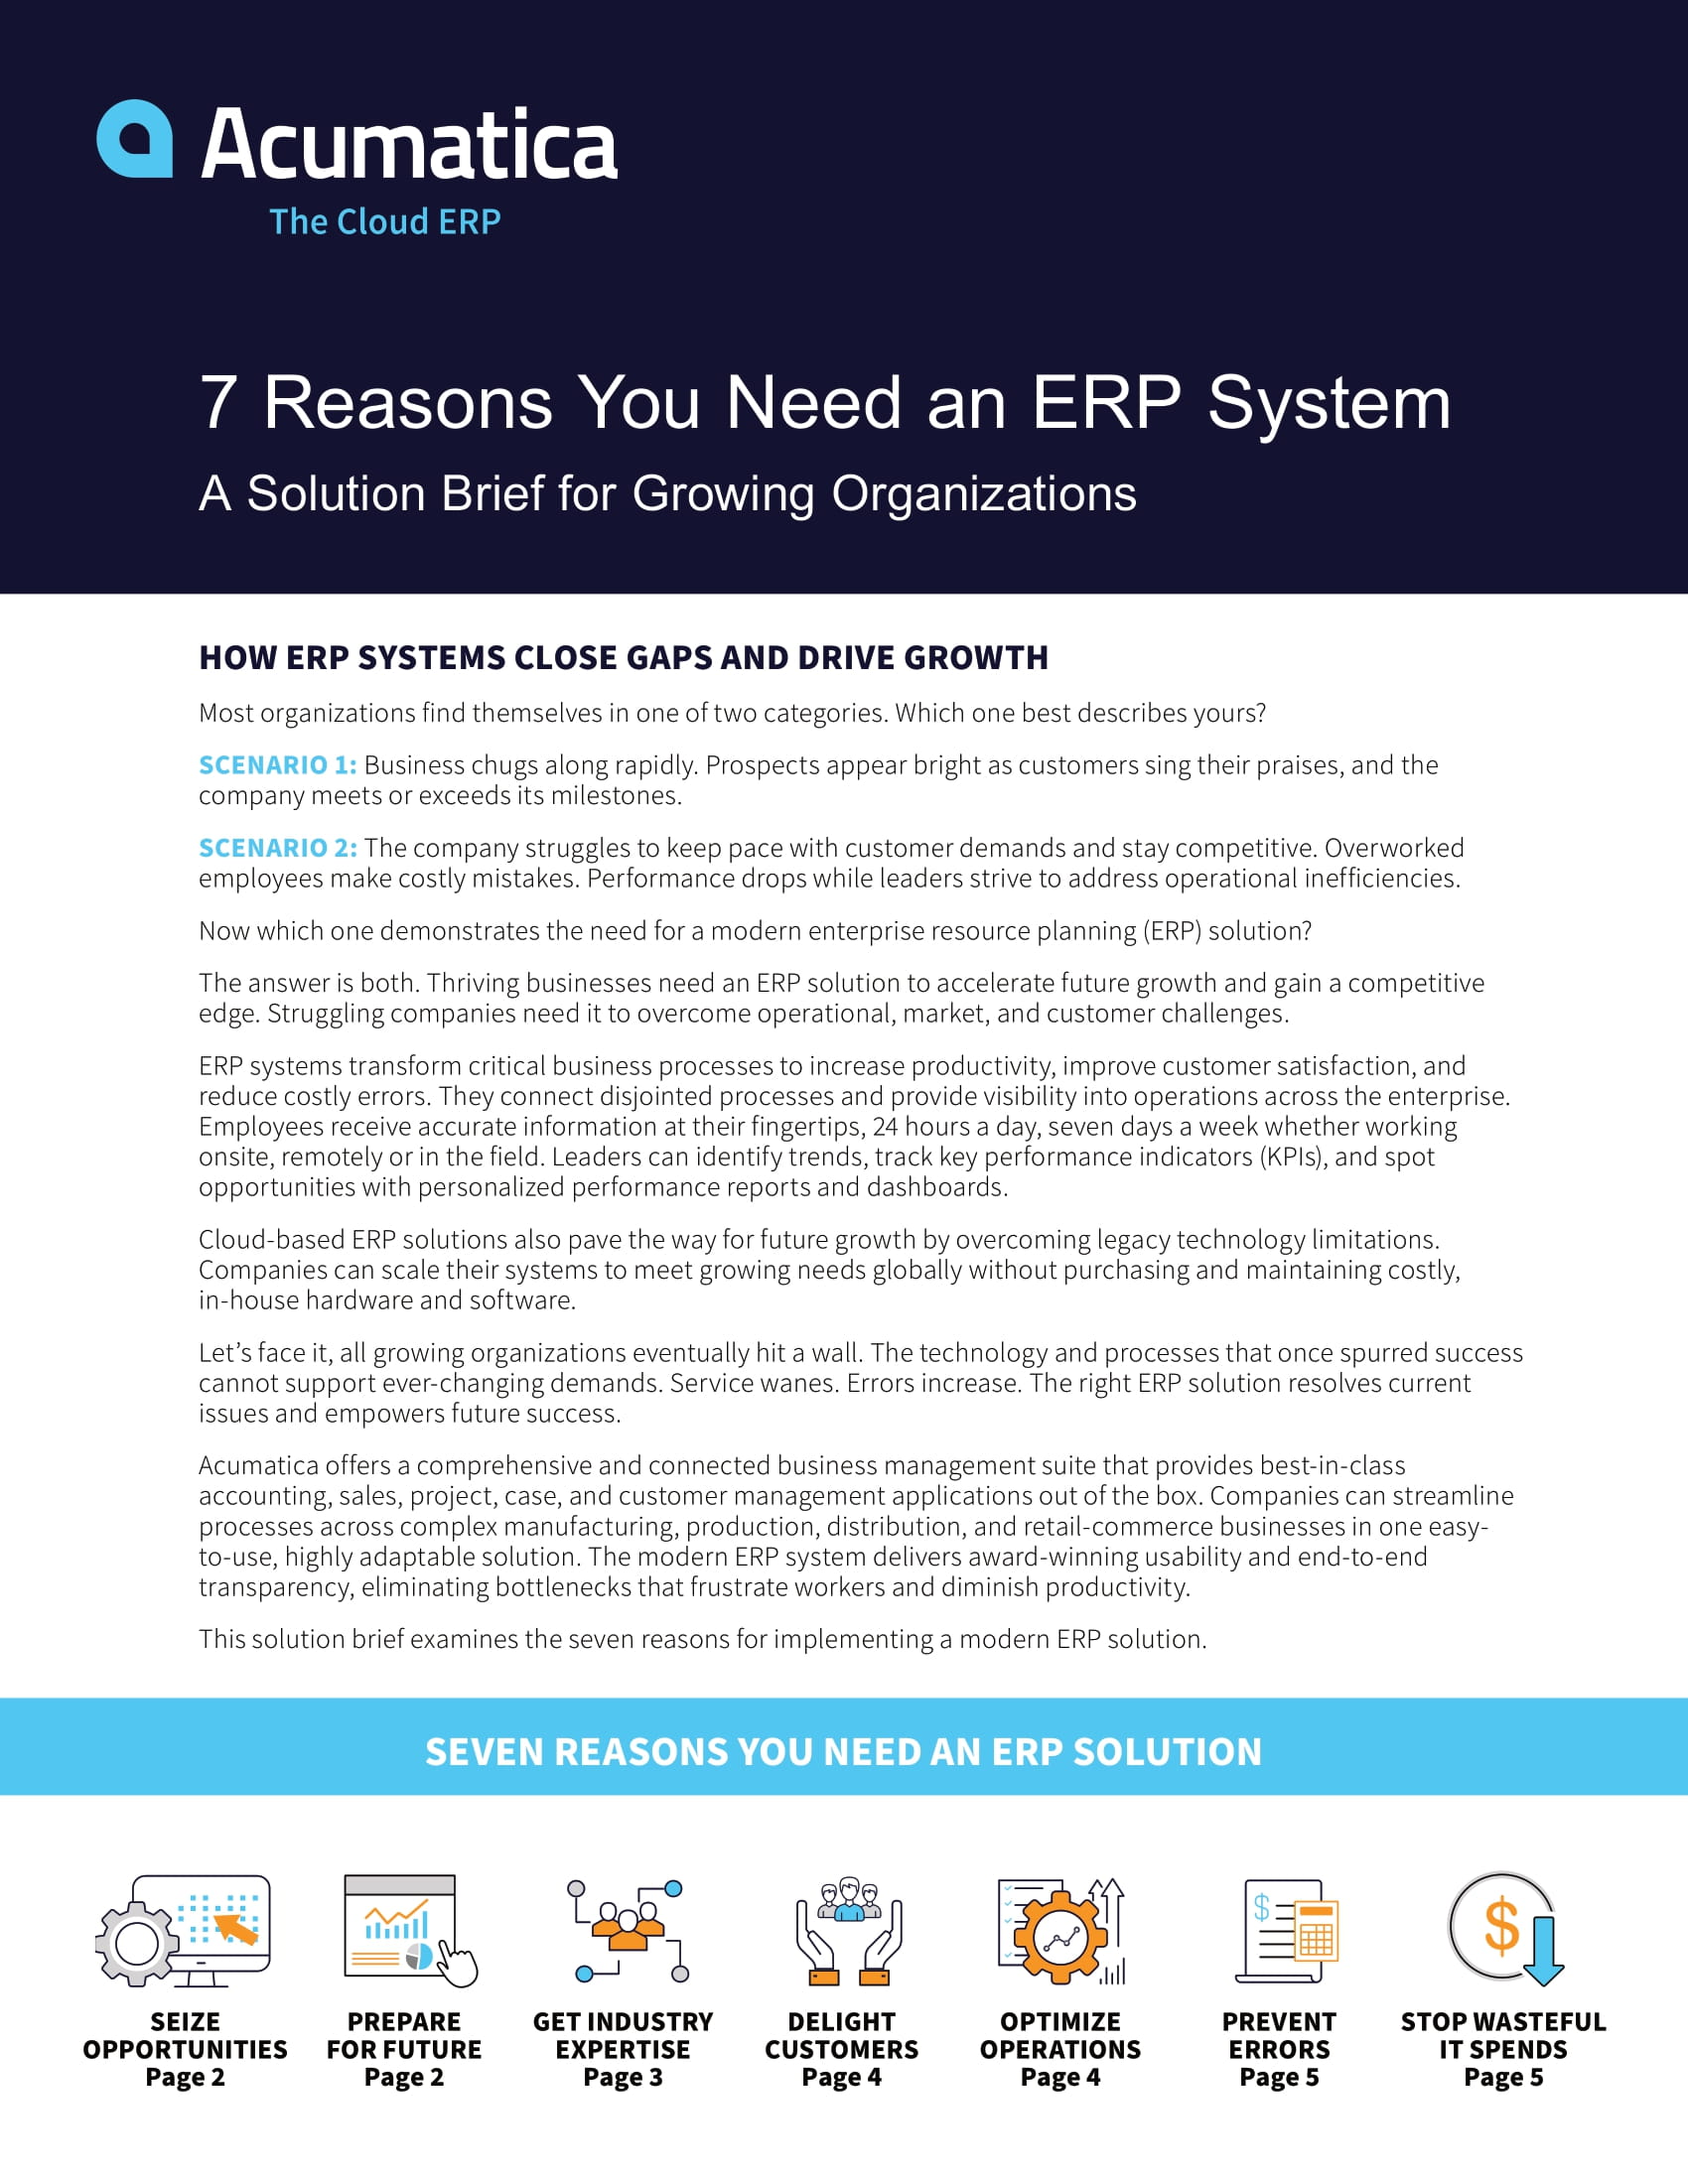 Here Are The 7 (Really Good) Reasons Every Business Needs an ERP Solution